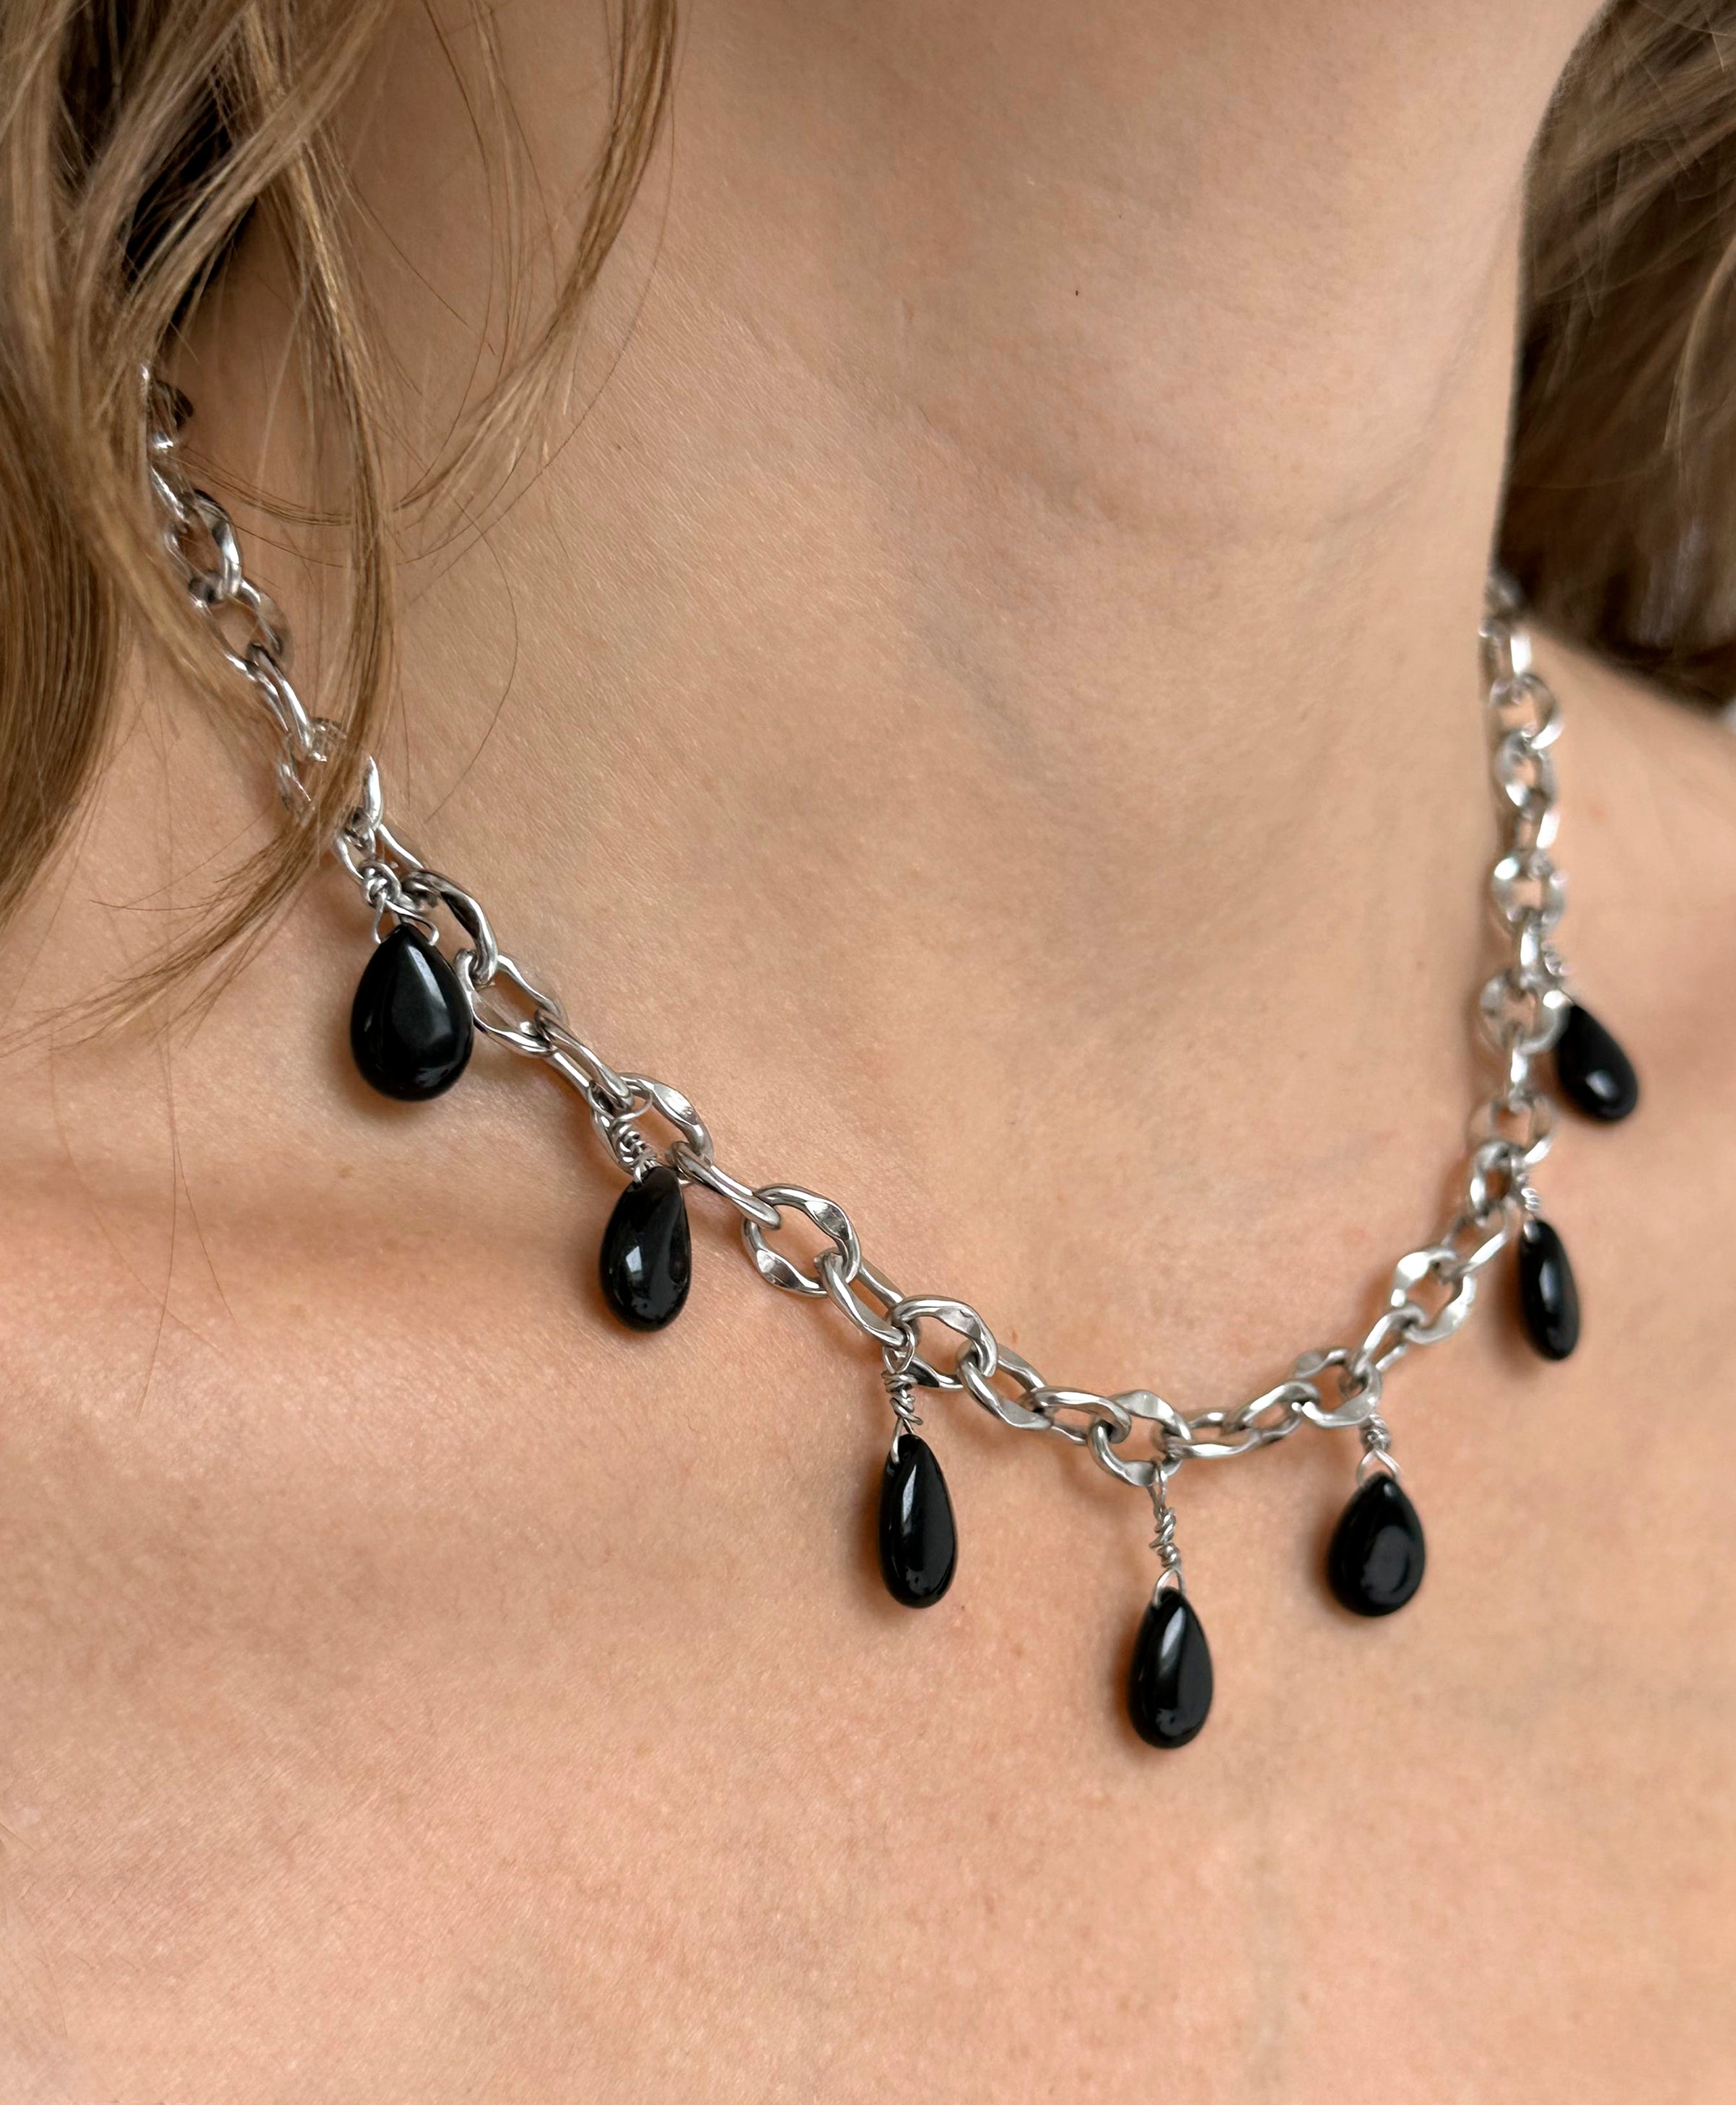 llayers-mens-women-jewelry-silver-stainlesssteel-choker-chain-necklace-unchained-009-agate-Brooklyn-New-York-1